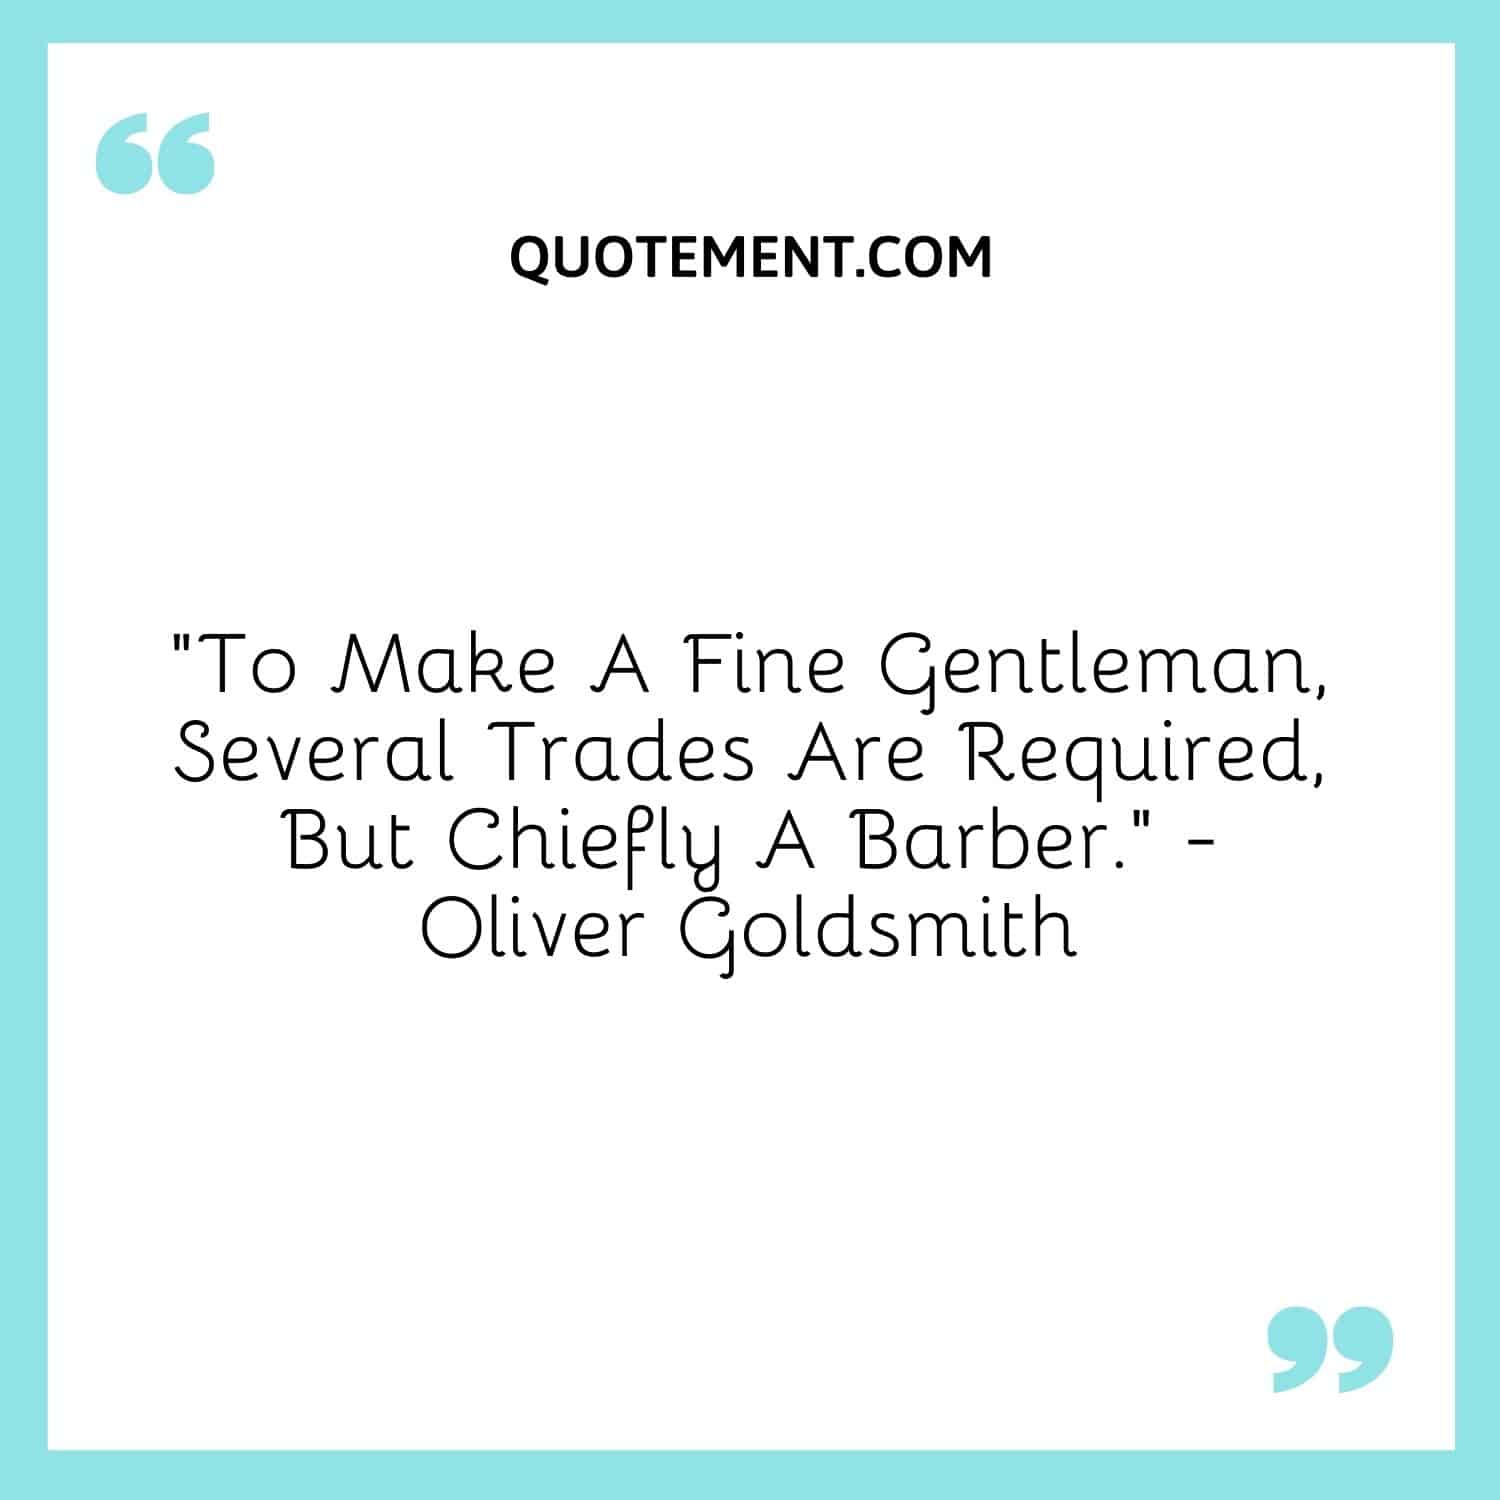 To Make A Fine Gentleman, Several Trades Are Required, But Chiefly A Barber. — Oliver Goldsmith